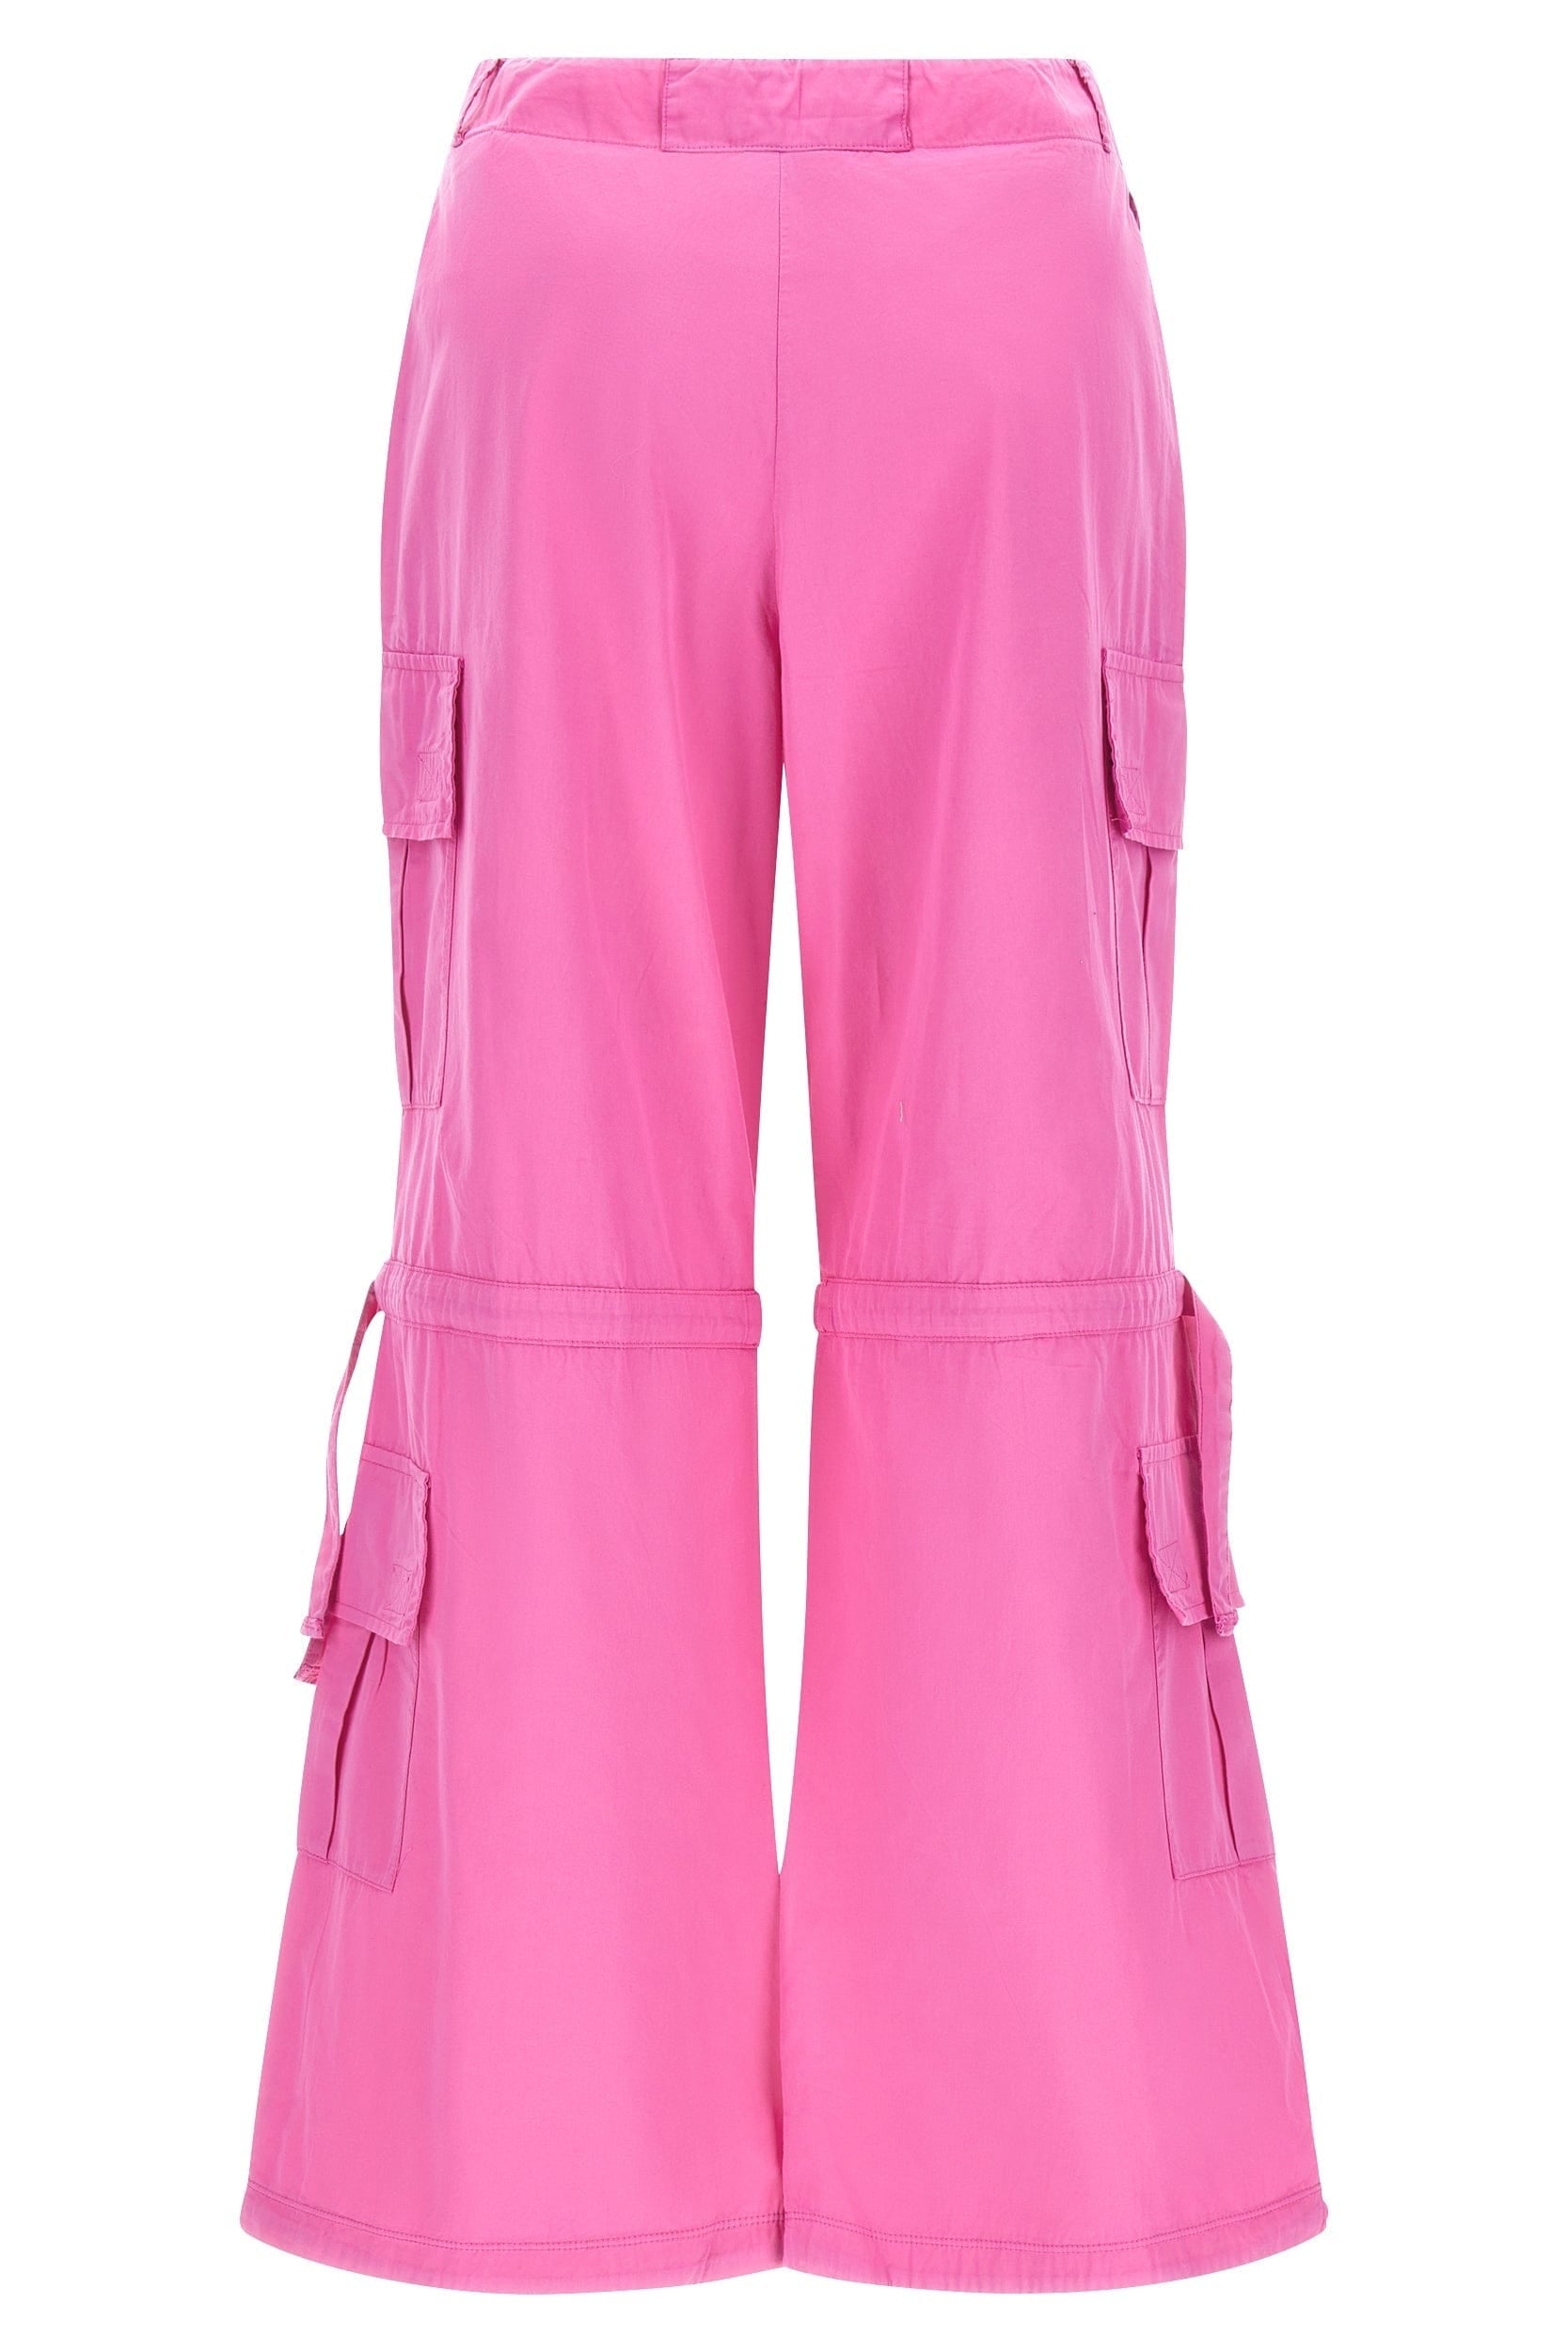 Cargo Pants - High Waisted - Full Length - Pink 6